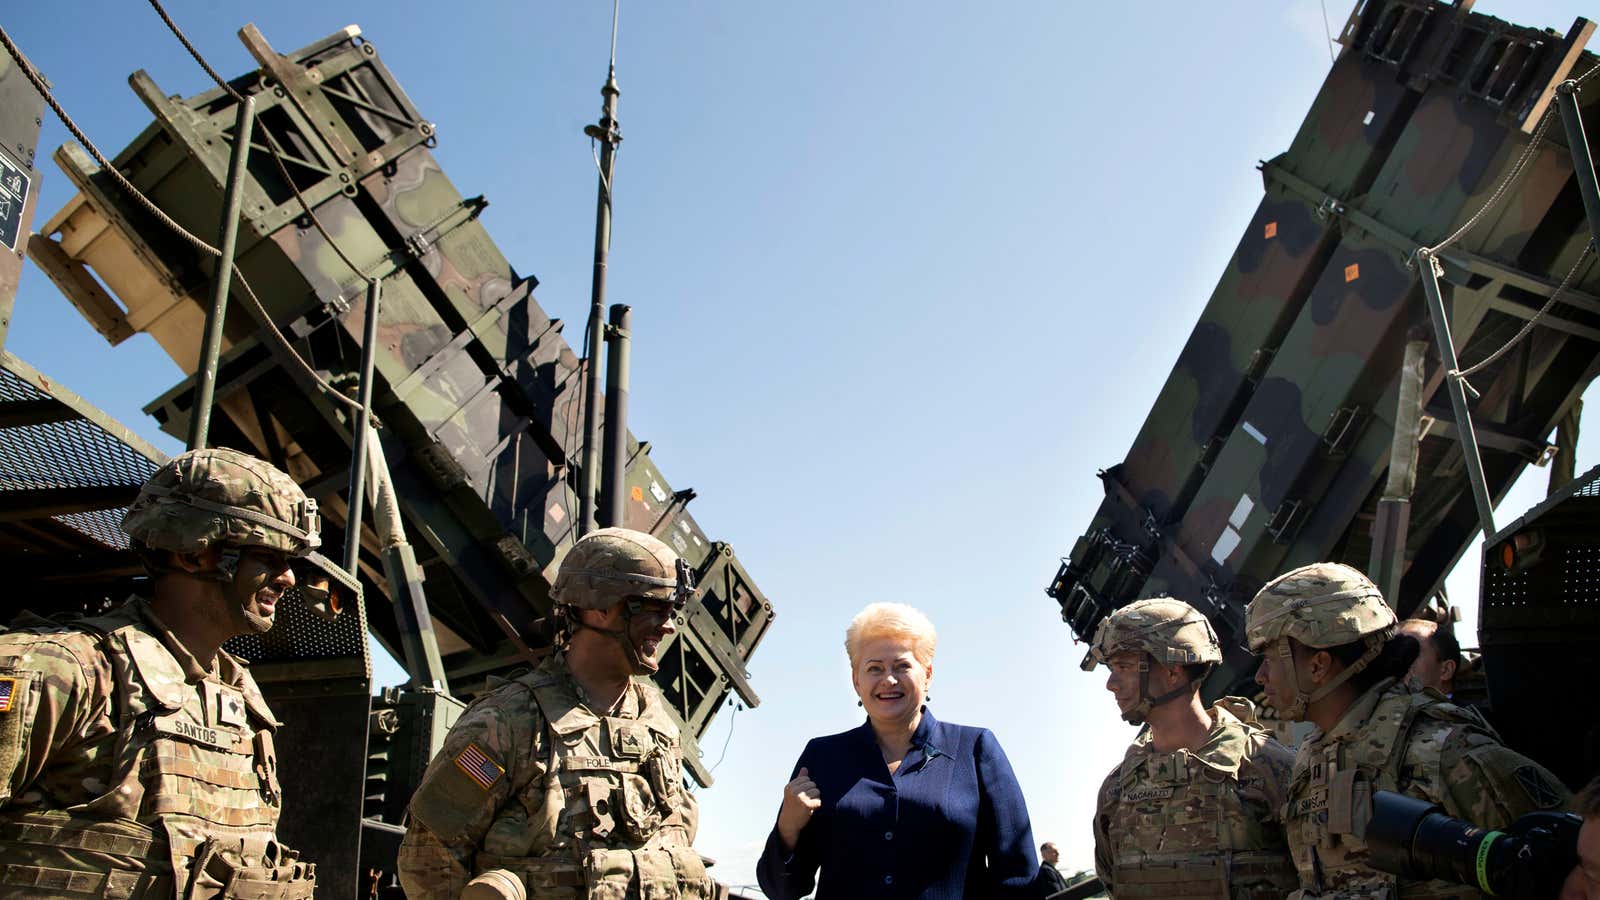 Would Lithuania’s president be so pumped if she knew the Patriot’s record?